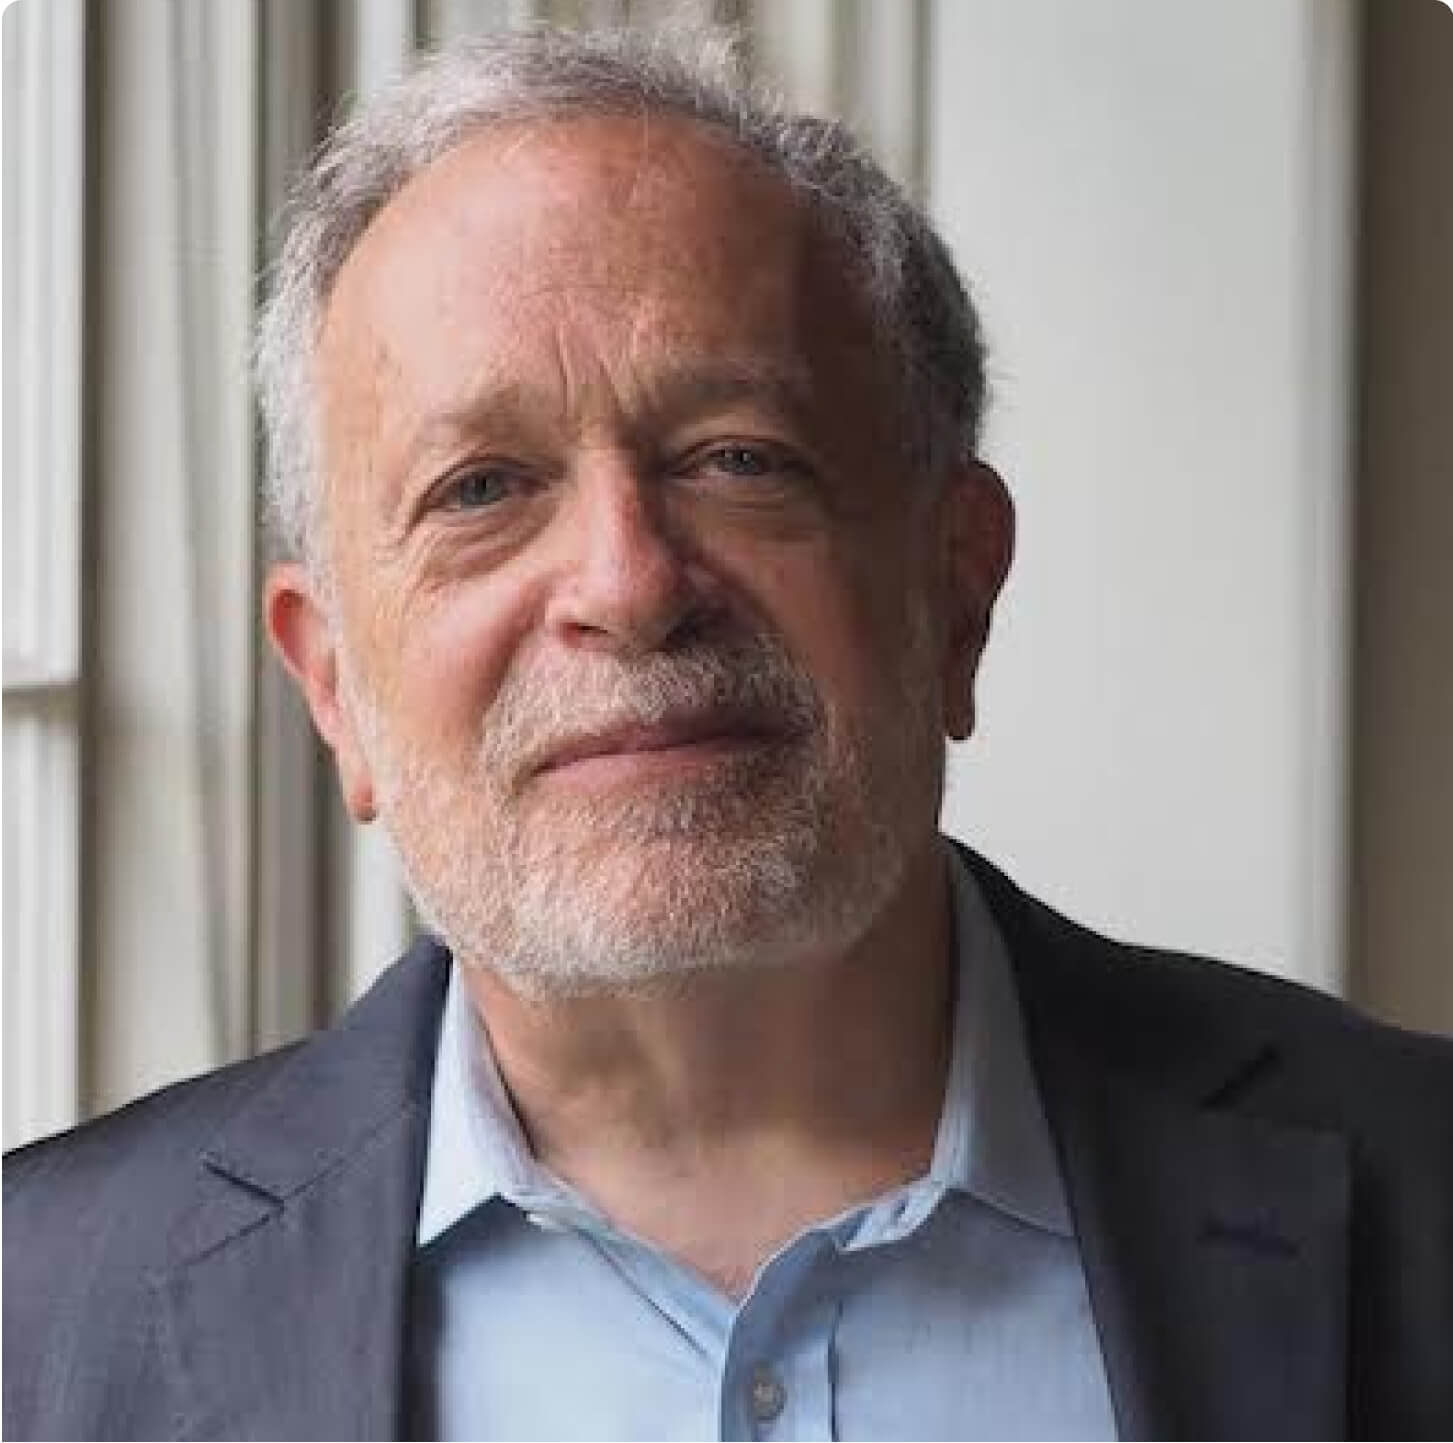 Is Robert Reich Married to Wife? Is he dating a girlfriend?